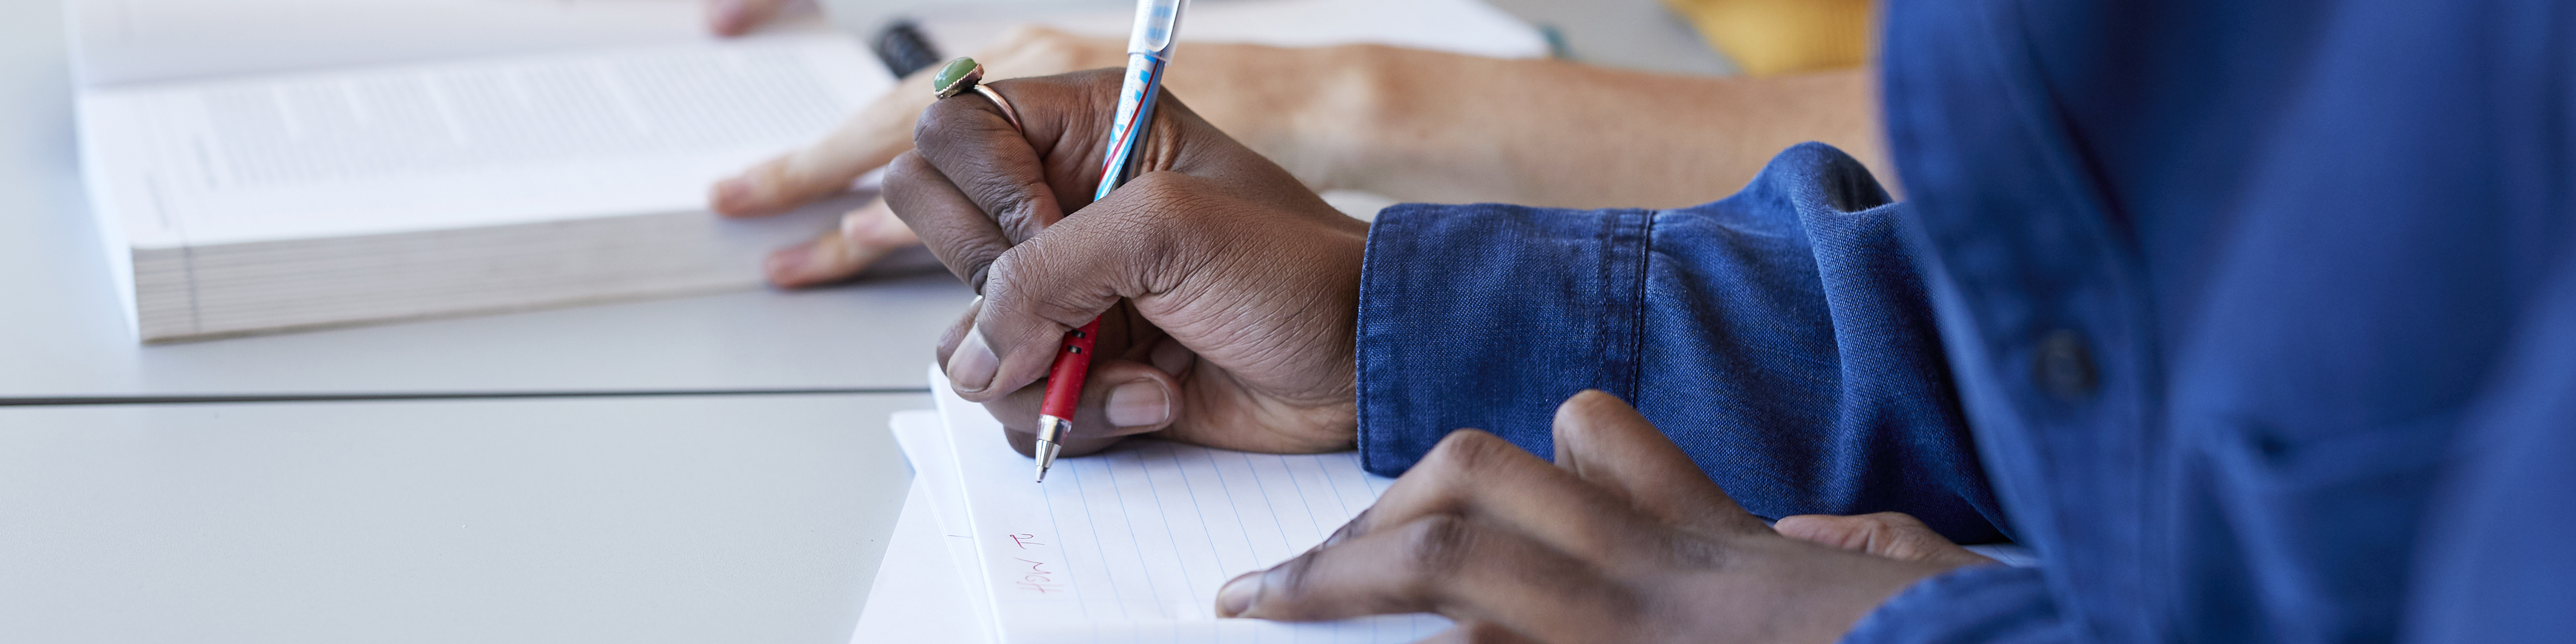 a close up of a pair of hands on a desk, with the right hand clutching a red pen that is being used to write on a blank piece of paper in a notebook